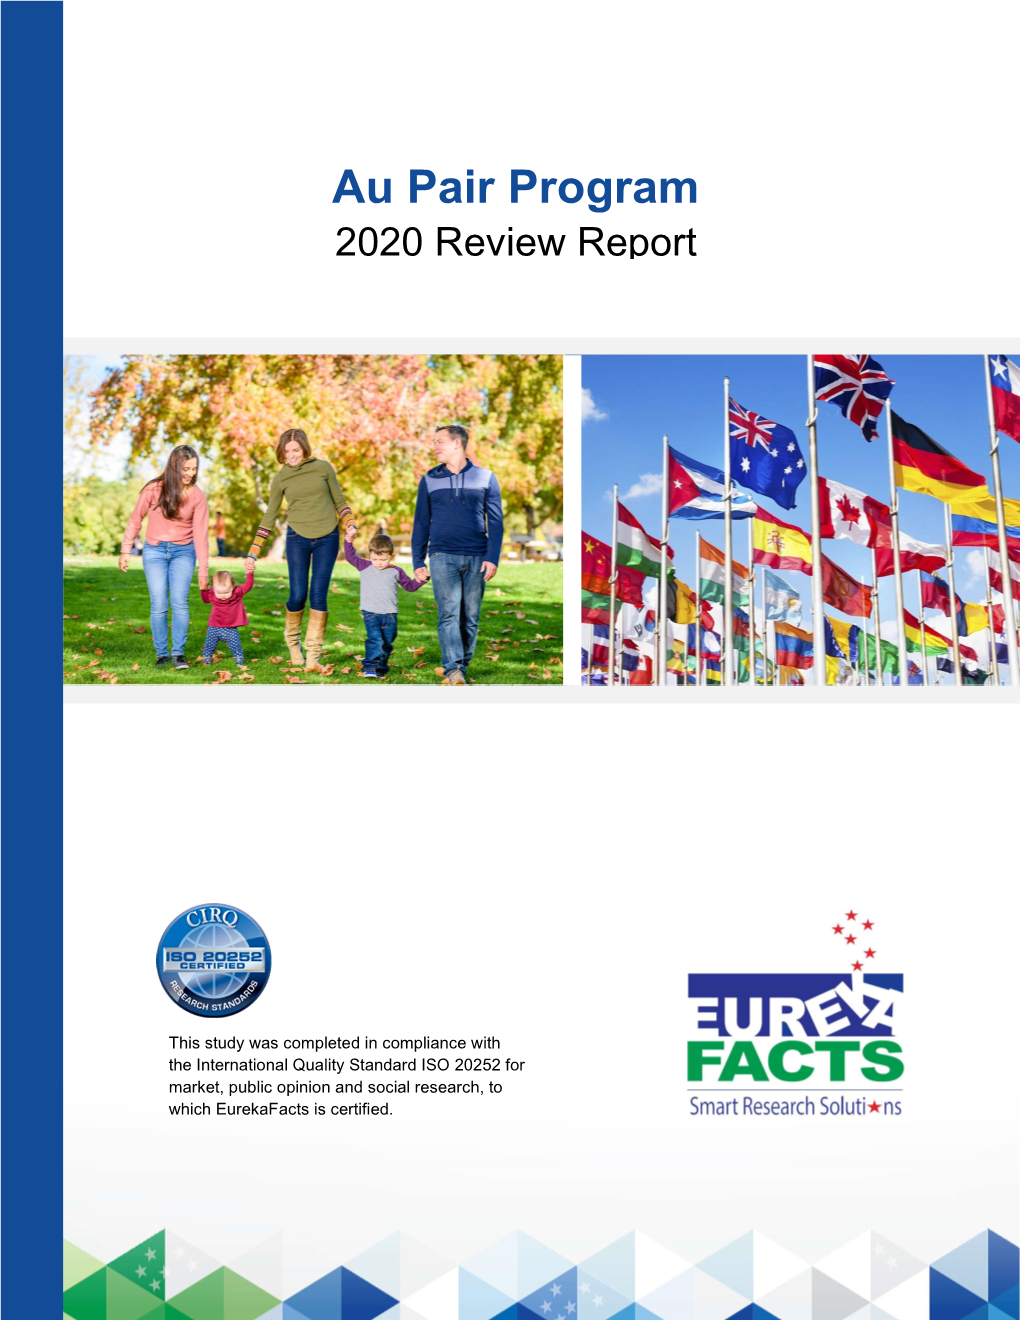 Multi-Perspective Assessment of the Au Pair Program